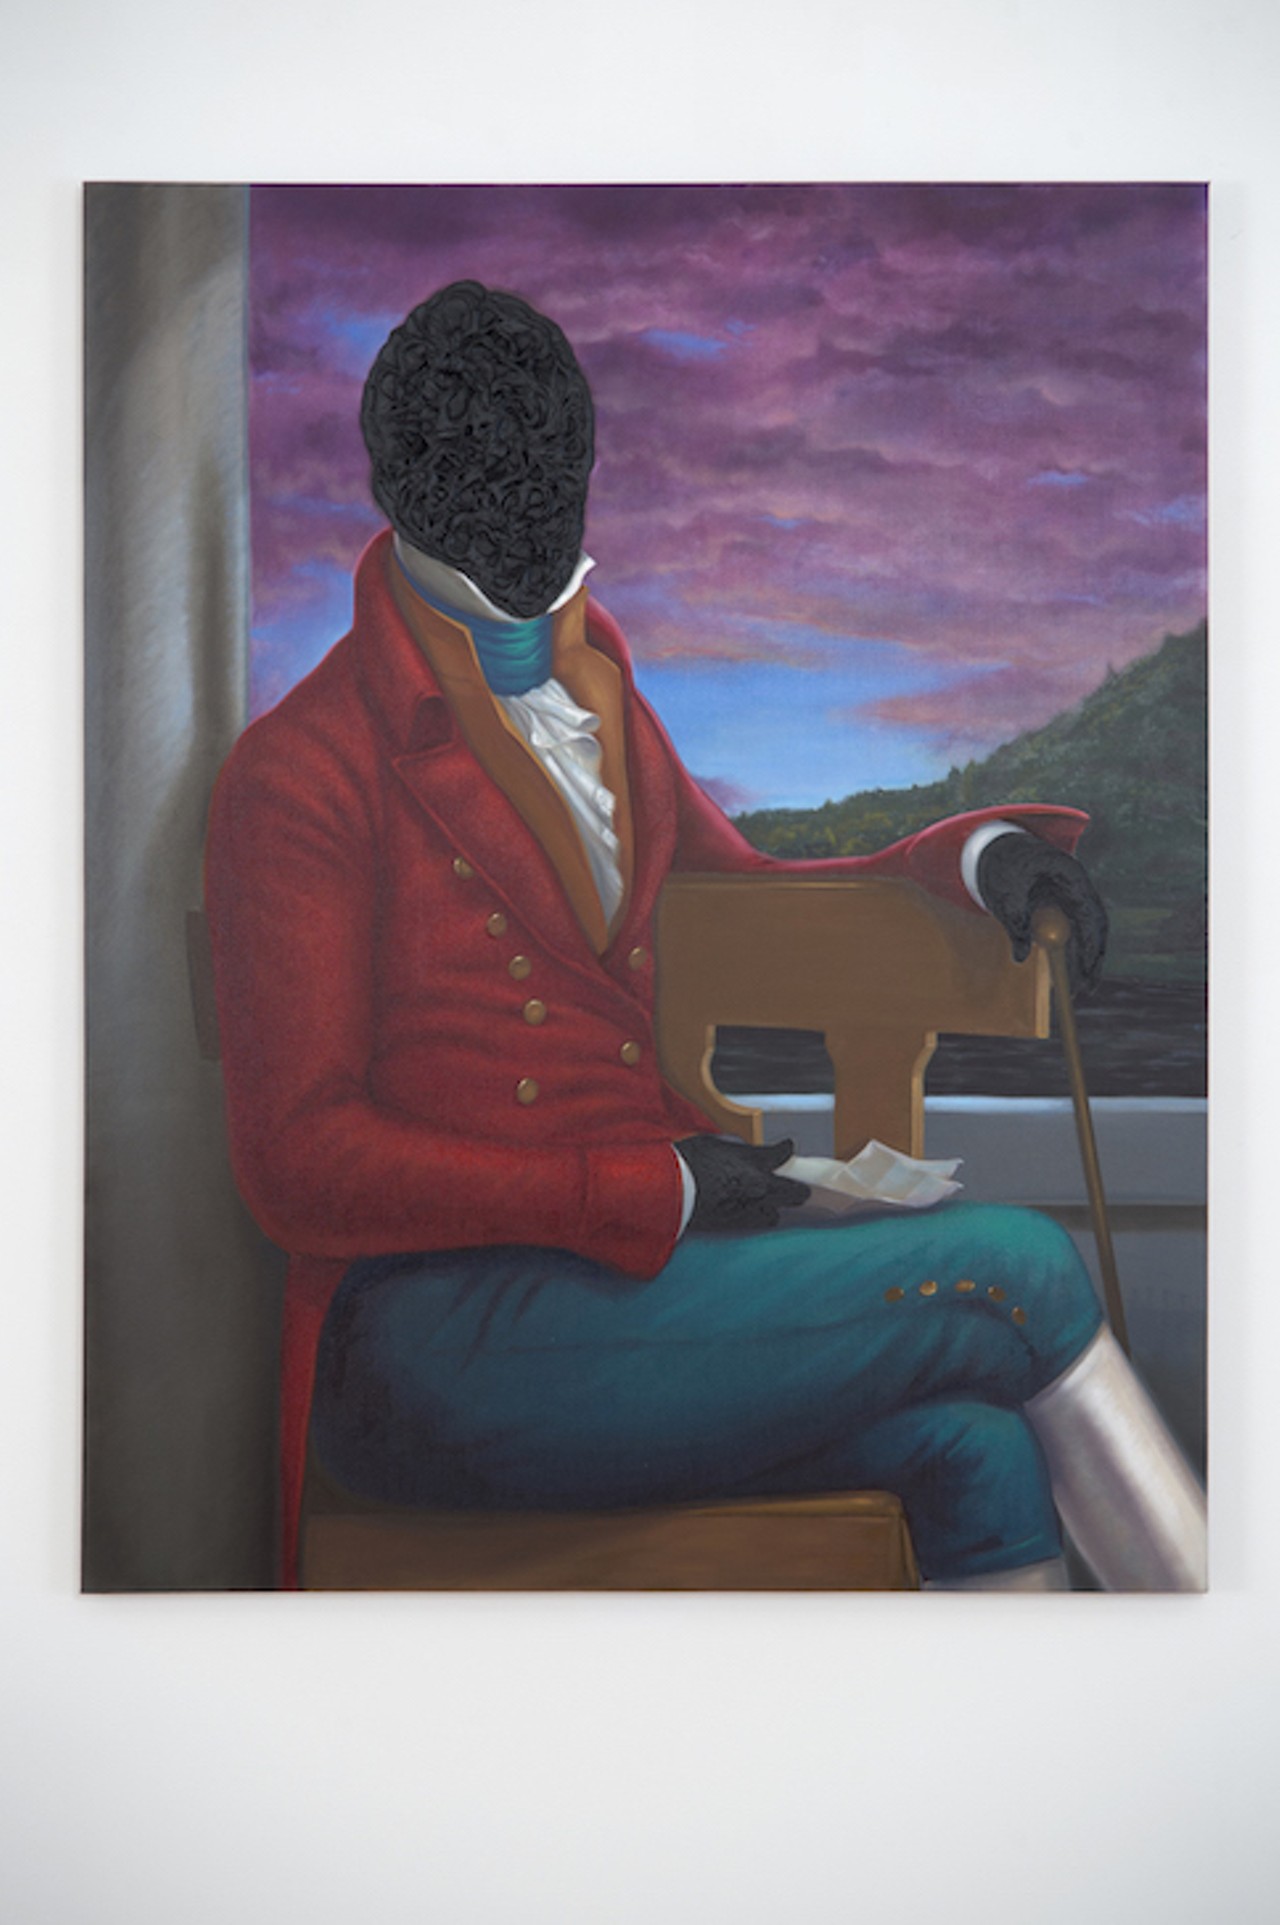 Titus Kaphar, Letters Never Read, 2017. Oil and tar on canvas.